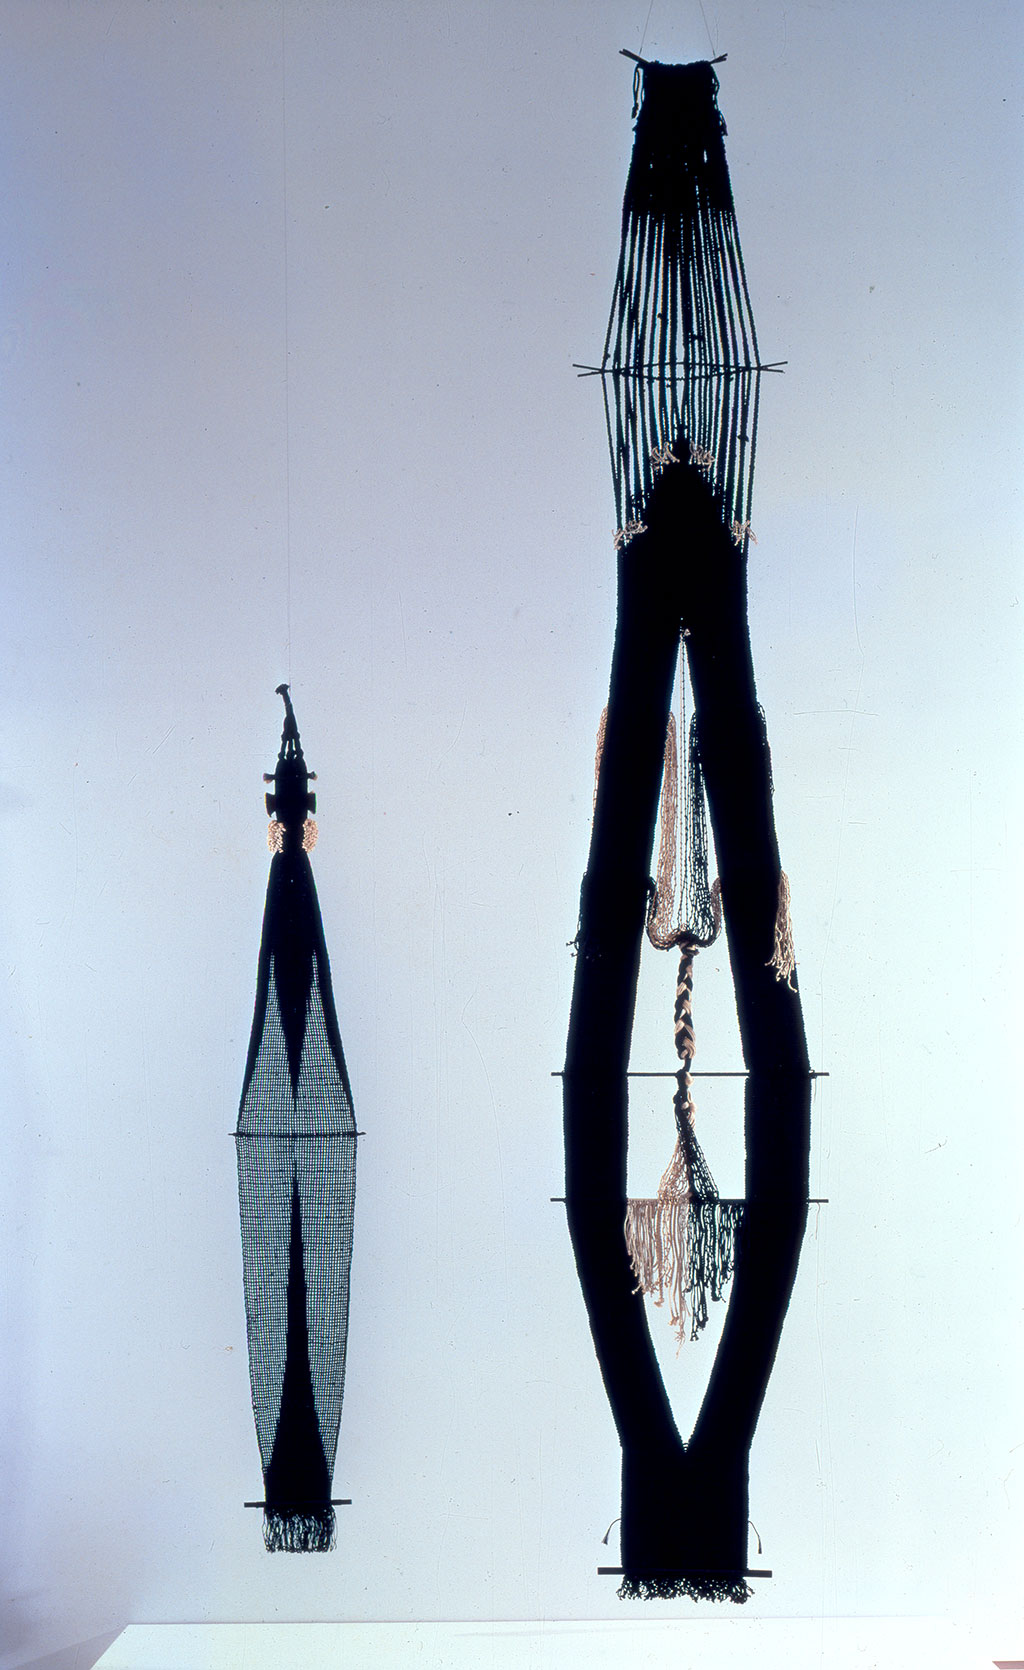 Lenore Tawney, Fountain of Word and Water, 1963. Gift of the Women's Committee of the Philadelphia Museum of Art, 1994, 1994.23.1. Courtesy of the artist.